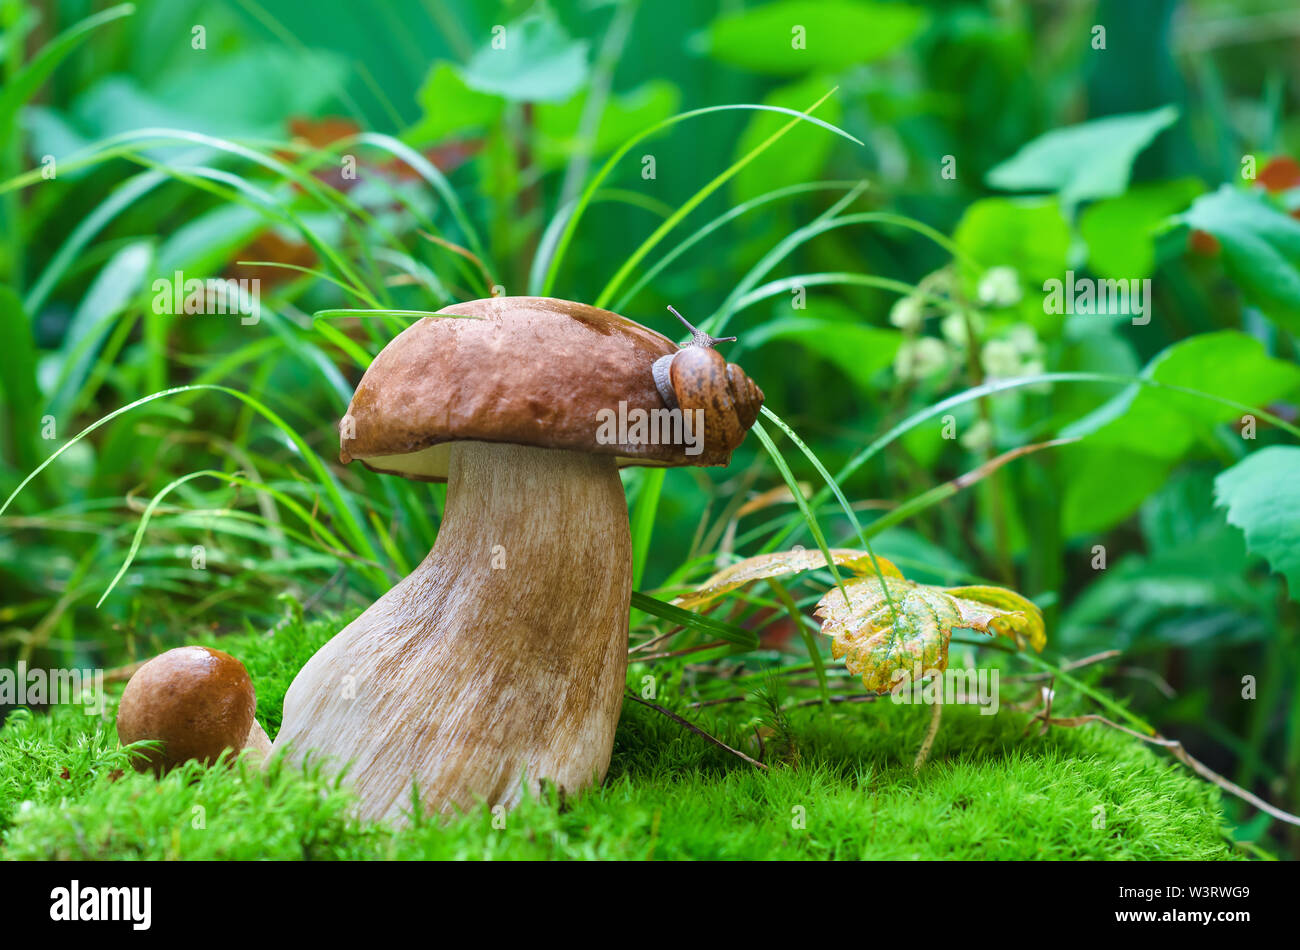 Edible mushrooms in the forest on a green background, white mushroom and snail Stock Photo